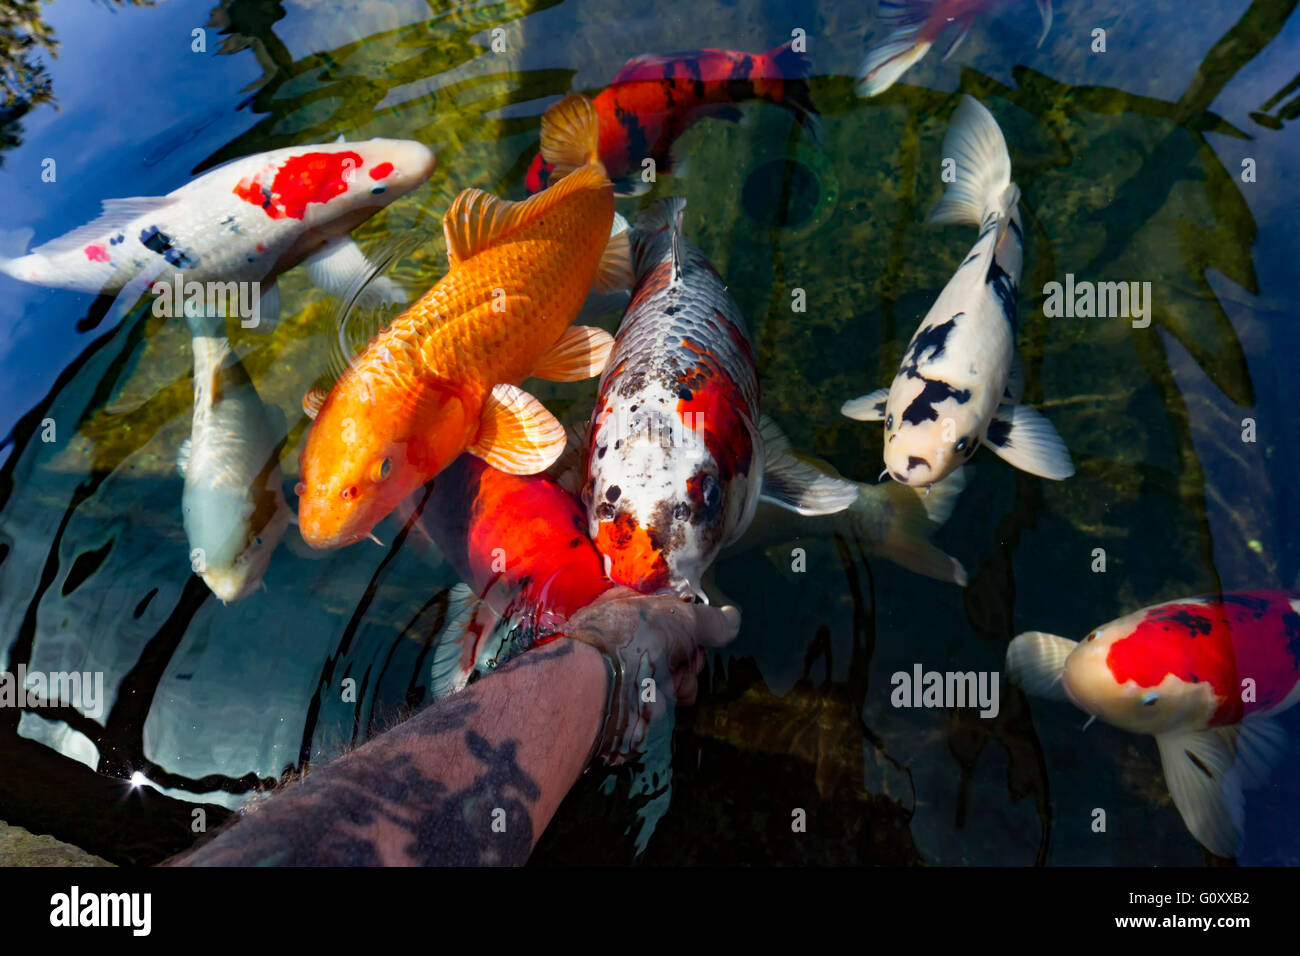 Koi Carp feeding from a persons hand in a garden pond. Stock Photo